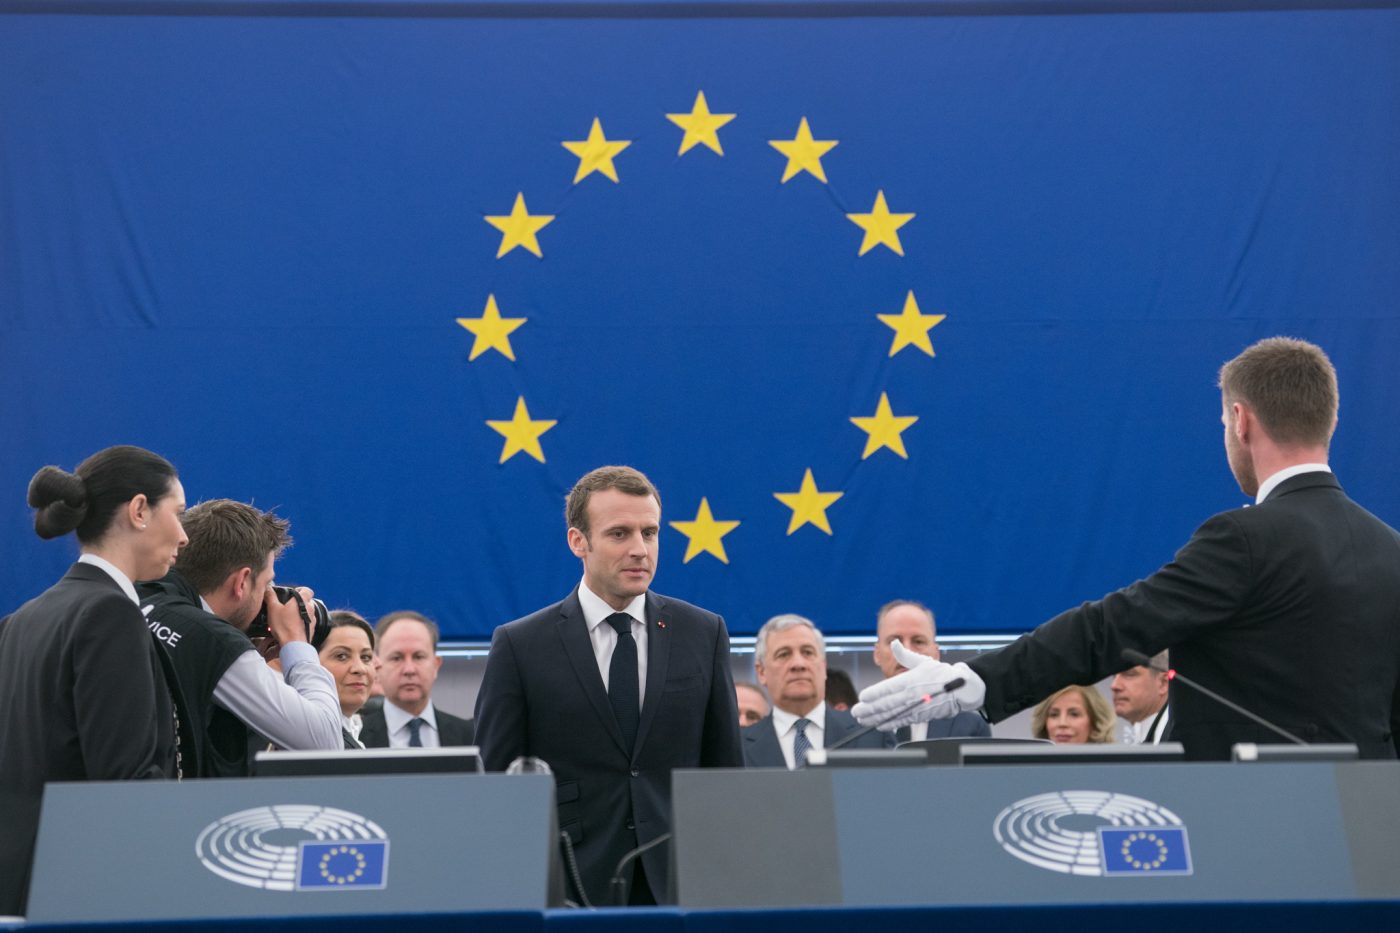 Photo: "Emmanuel Macron debates the future of Europe with MEPs" © the European Union 2018 - European Parliament under CC BY-NC-ND 4.0.